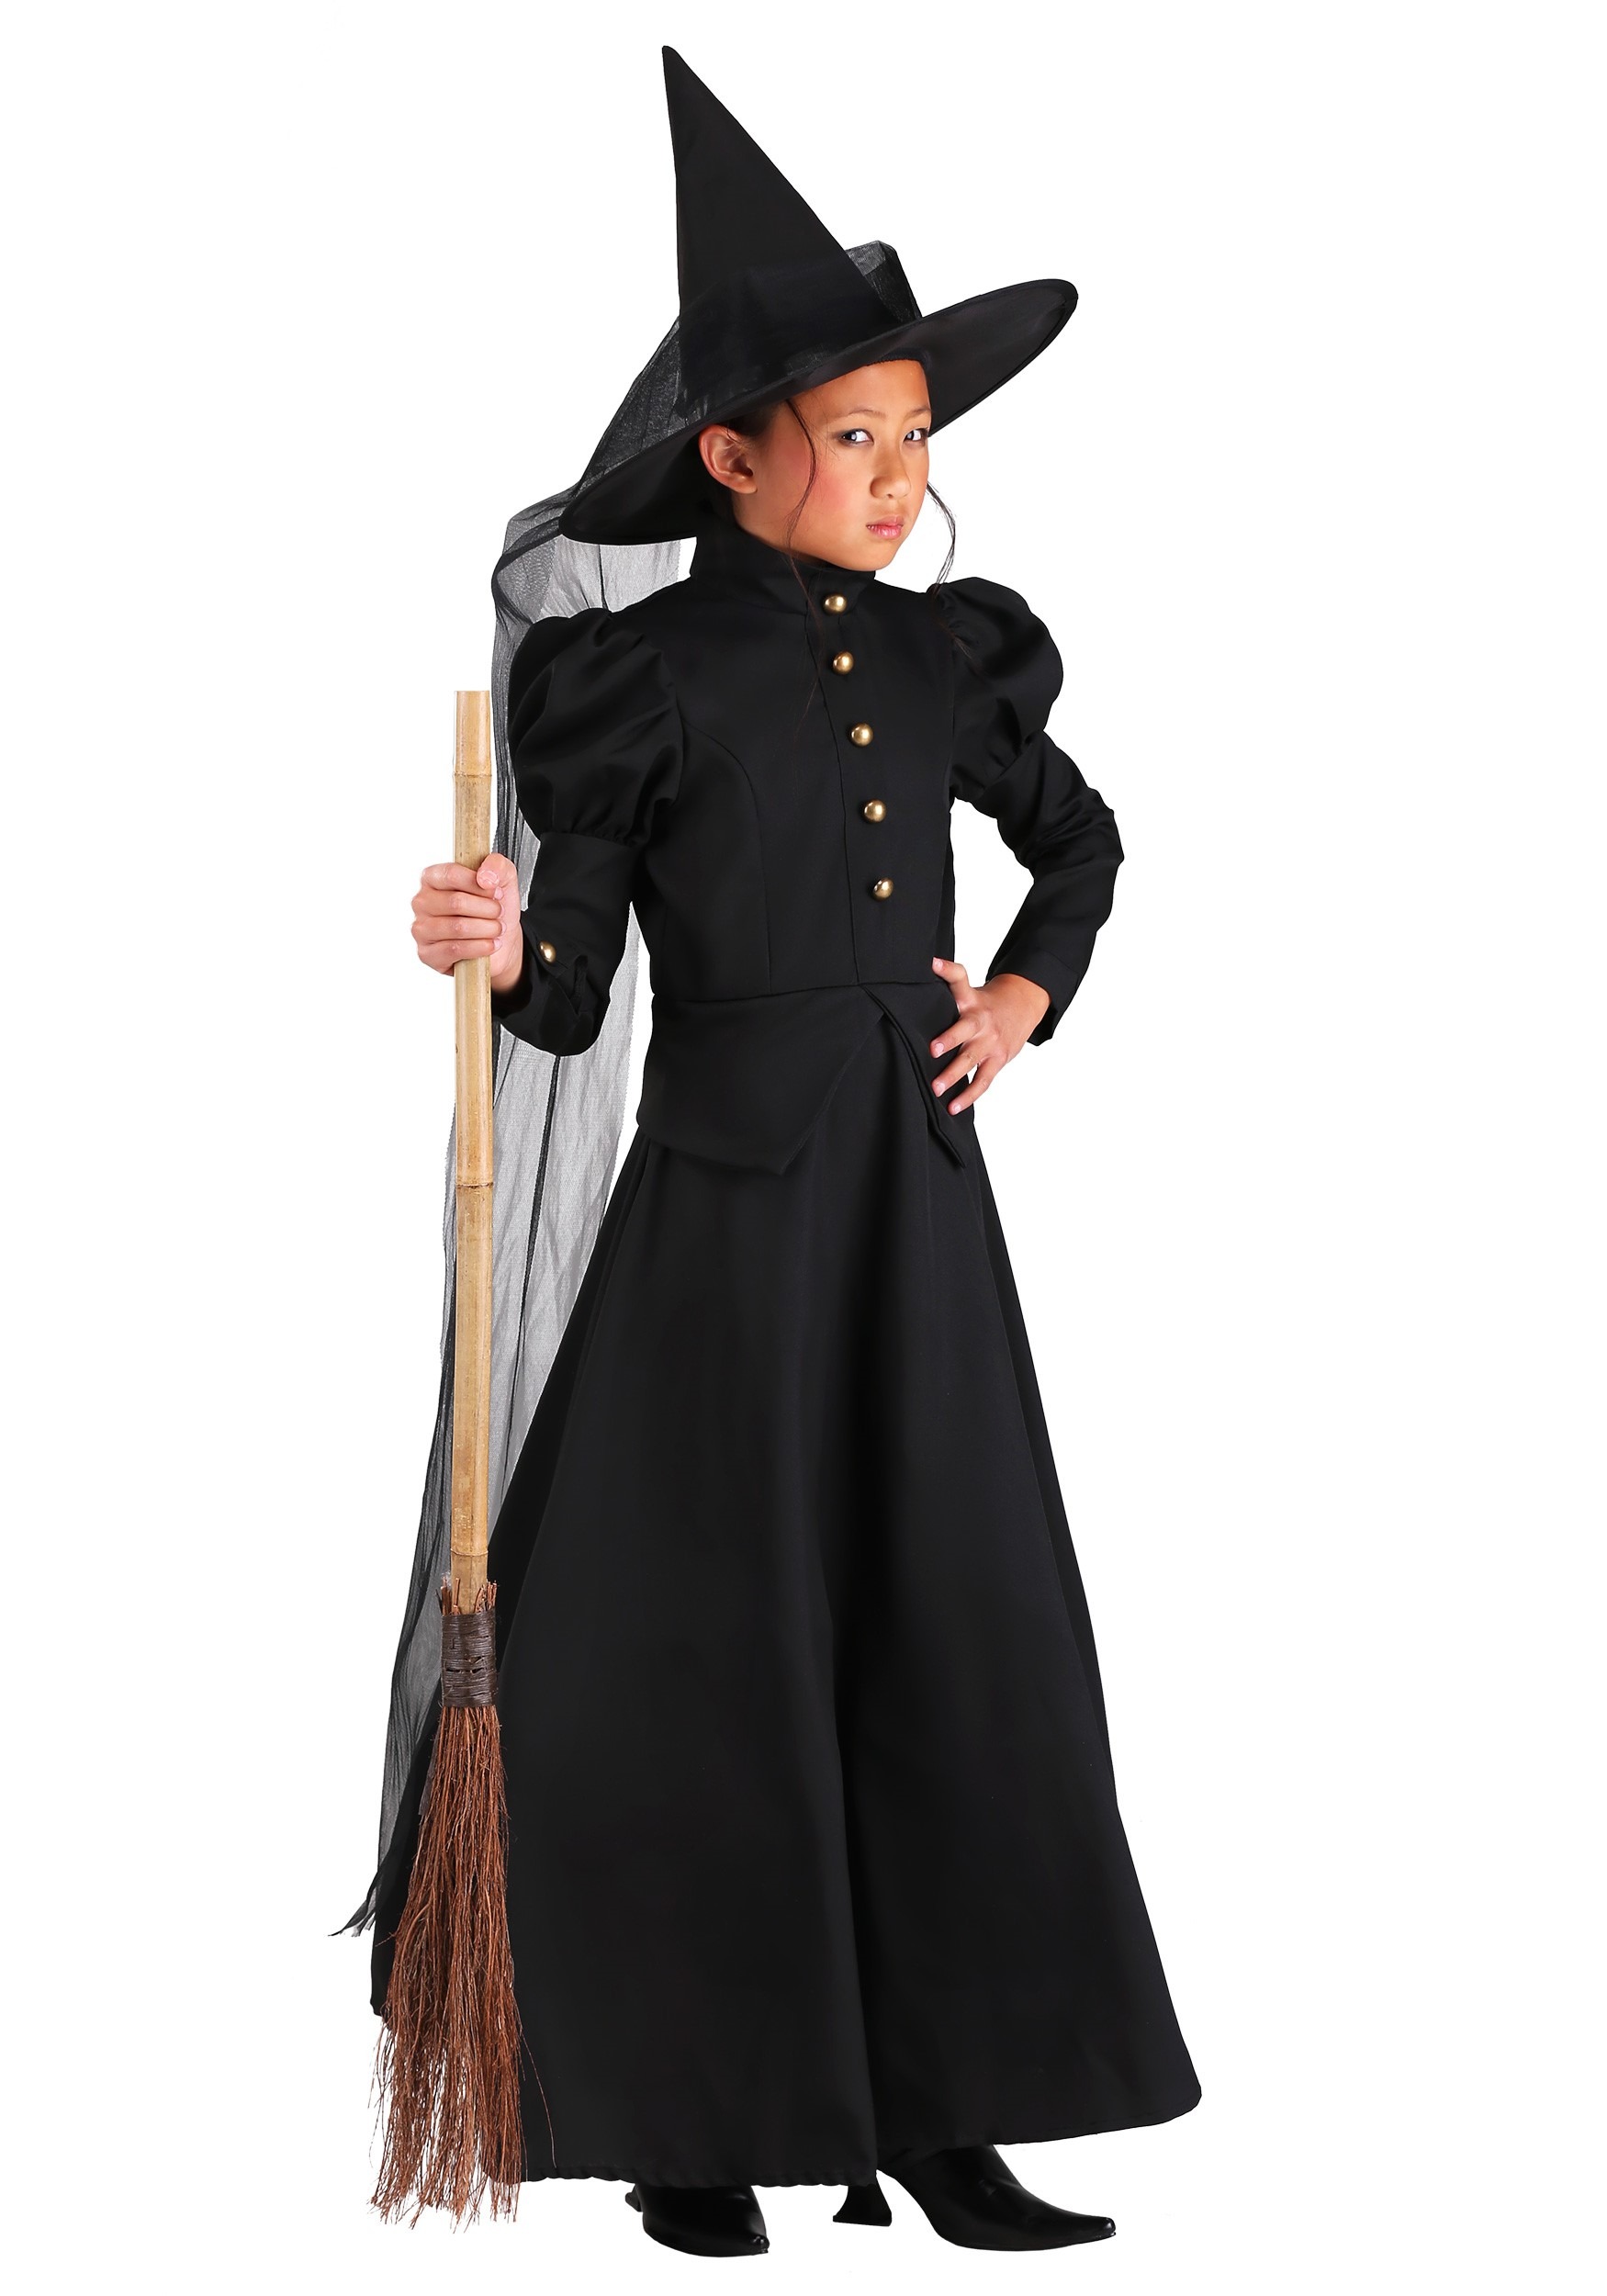 Photos - Fancy Dress Deluxe FUN Costumes  Witch Costume for Girls Black FUN1800 